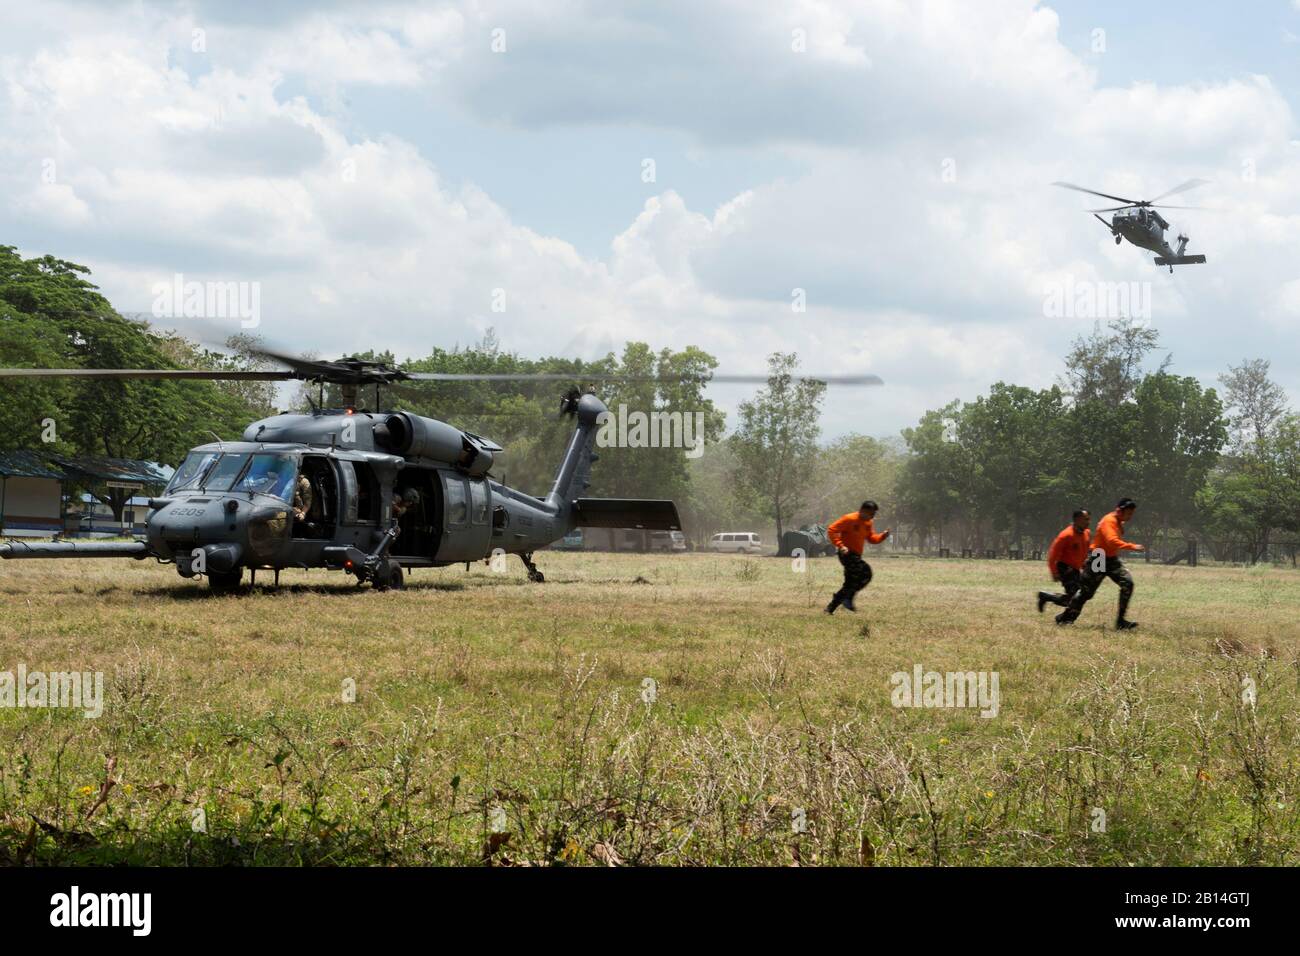 Philippine Air Force pararescuemen assigned to the 505th Search and Rescue Group exit a U.S. Air Force HH-60 Pave Hawk with the 33rd Rescue Squadron, Kadena Air Base, Japan, during a mass casualty training exercise as part of Exercise Balikatan at Clark Air Base, Pampanga, Philippines, May 11, 2018. Evaluators assessed Philippine and U.S. service members' performance as they cared for and transported casualties in a remote location. Exercise Balikatan, in its 34th iteration, is an annual U.S.-Philippine military training exercise focused on a variety of missions, including humanitarian assista Stock Photo